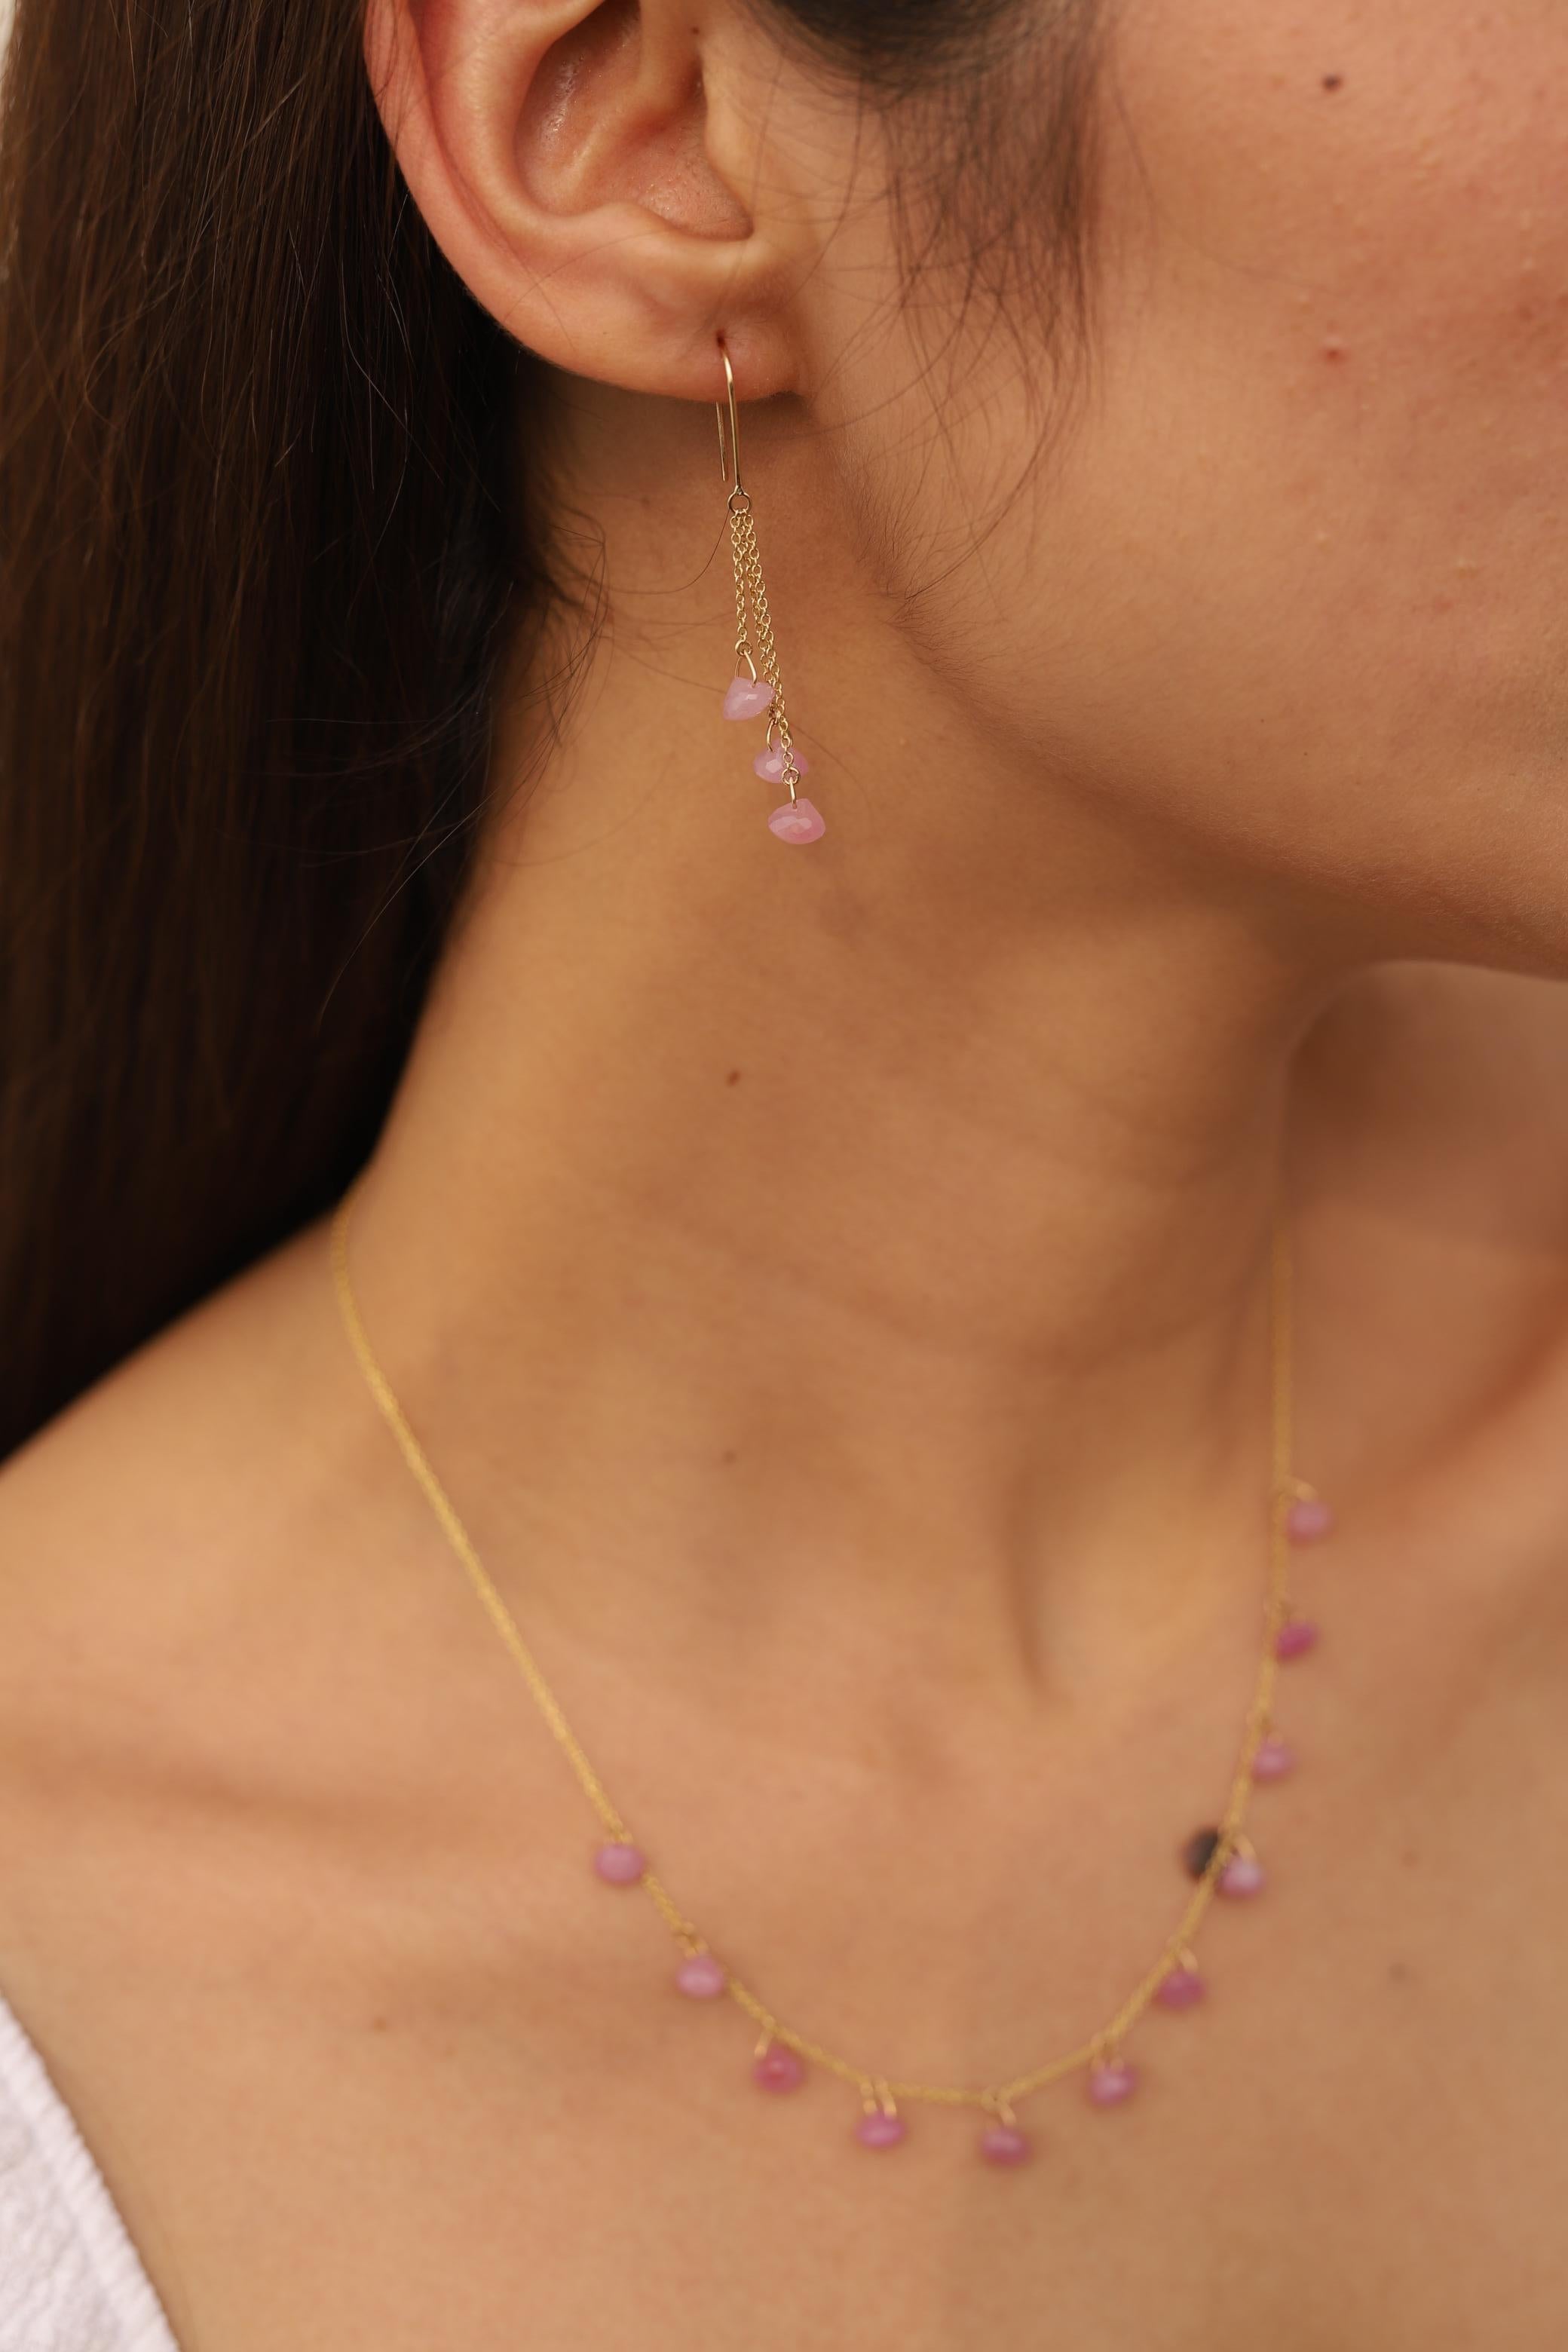 Pink Sapphire Dangle and Drop earrings to make a statement with your look. These earrings create a sparkling, luxurious look featuring drop cut gemstone.
If you love to gravitate towards unique styles, this piece of jewelry is perfect for